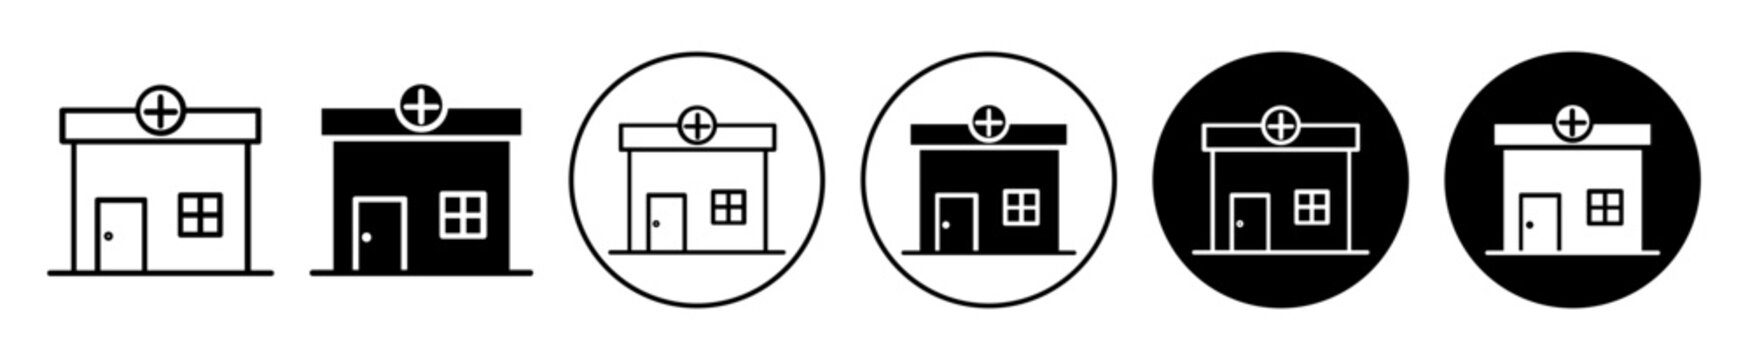 pharmacy icon set. medic or clinic building line vector symbol. drugstore or medical center sign in black filled and outlined style.